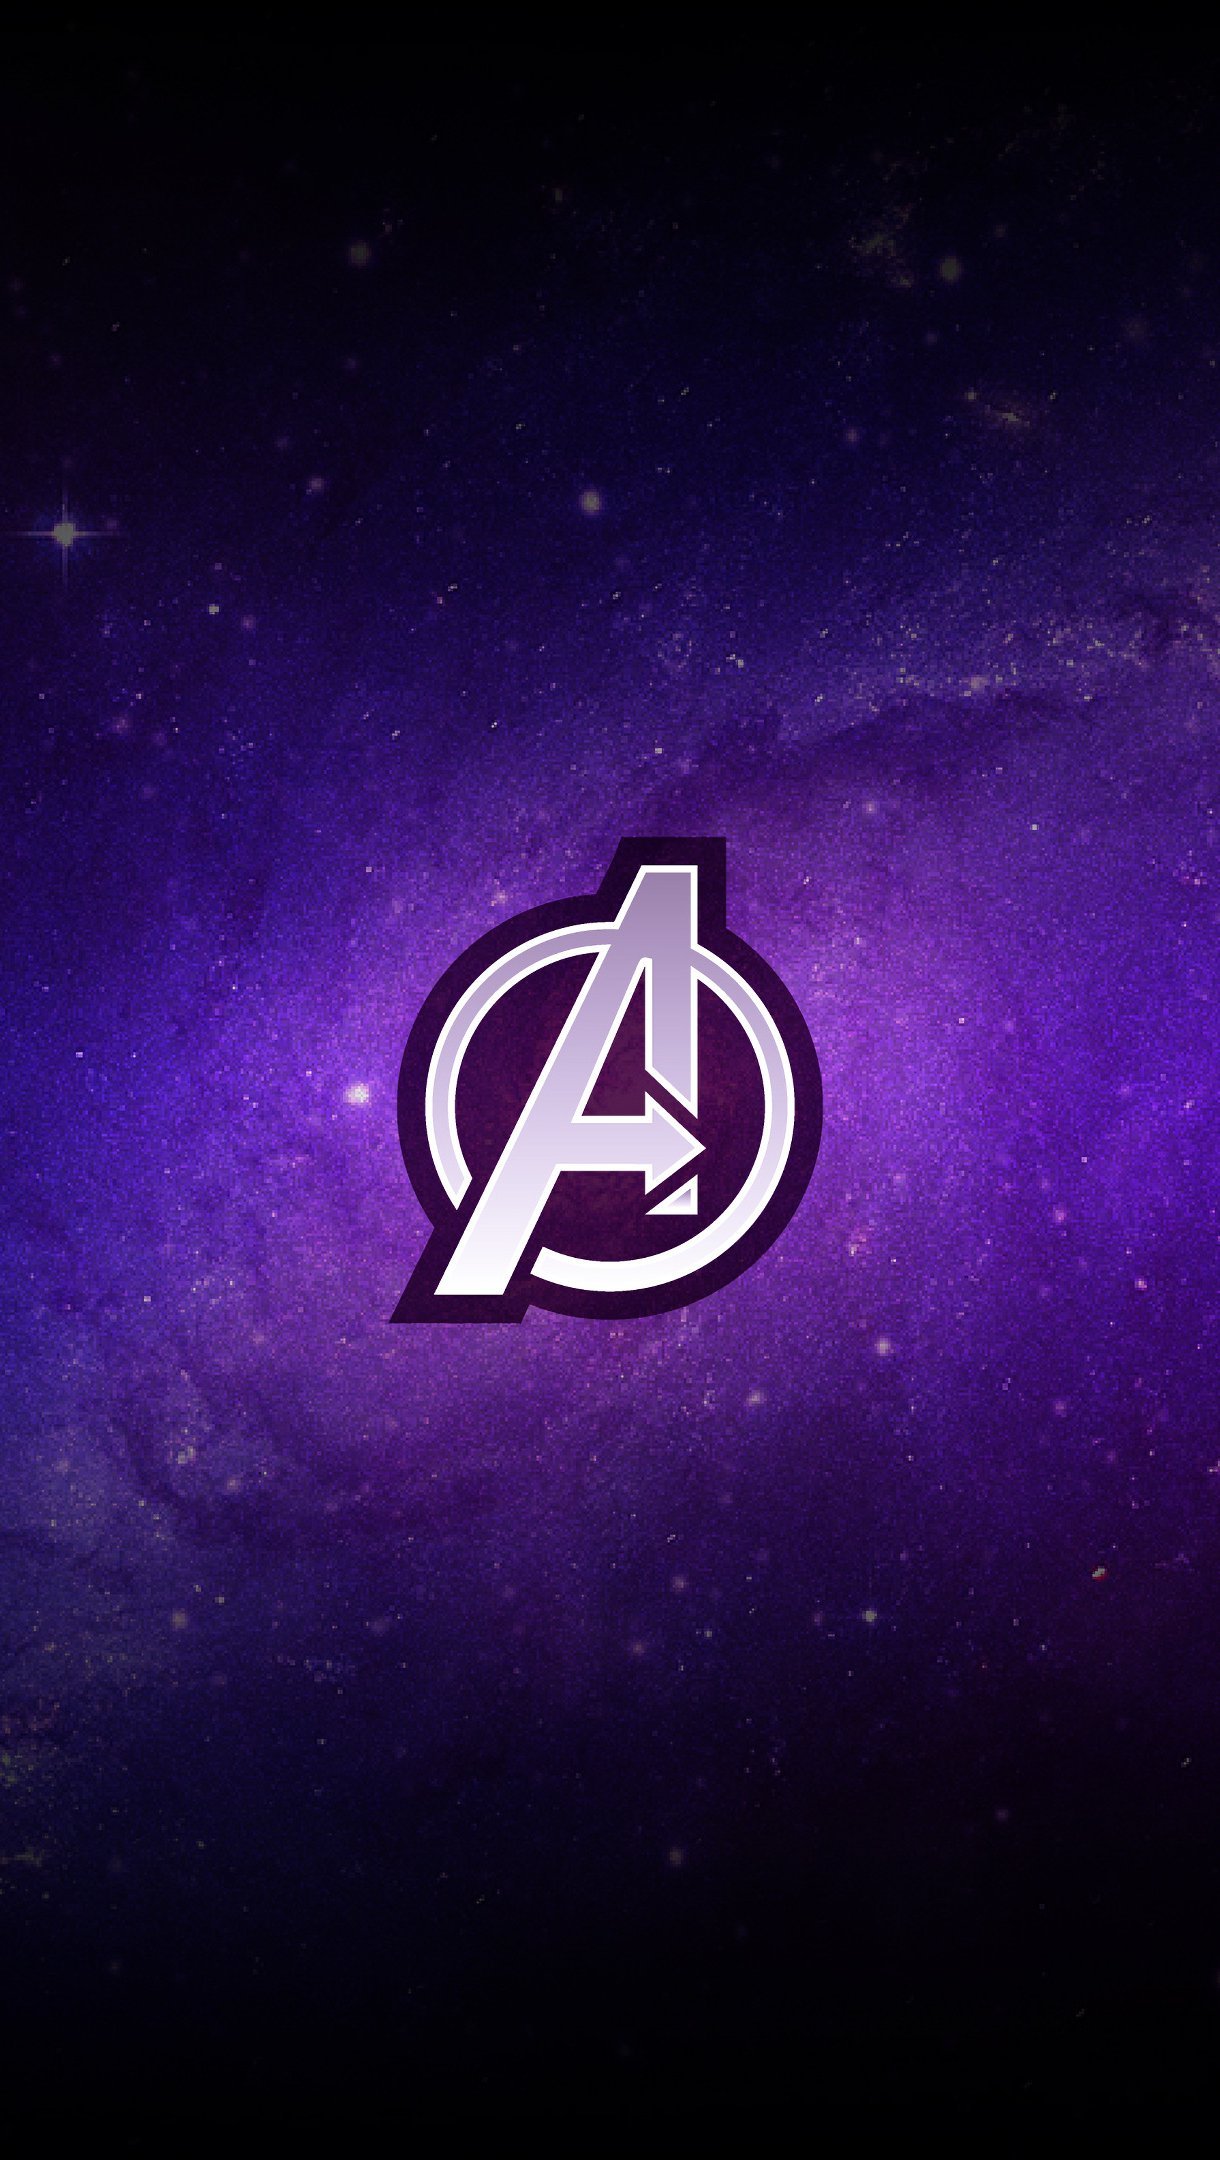 61 2018 Avengers Laptop Wallpapers HD 4K 5K for PC and Mobile   Download free images for iPhone Android